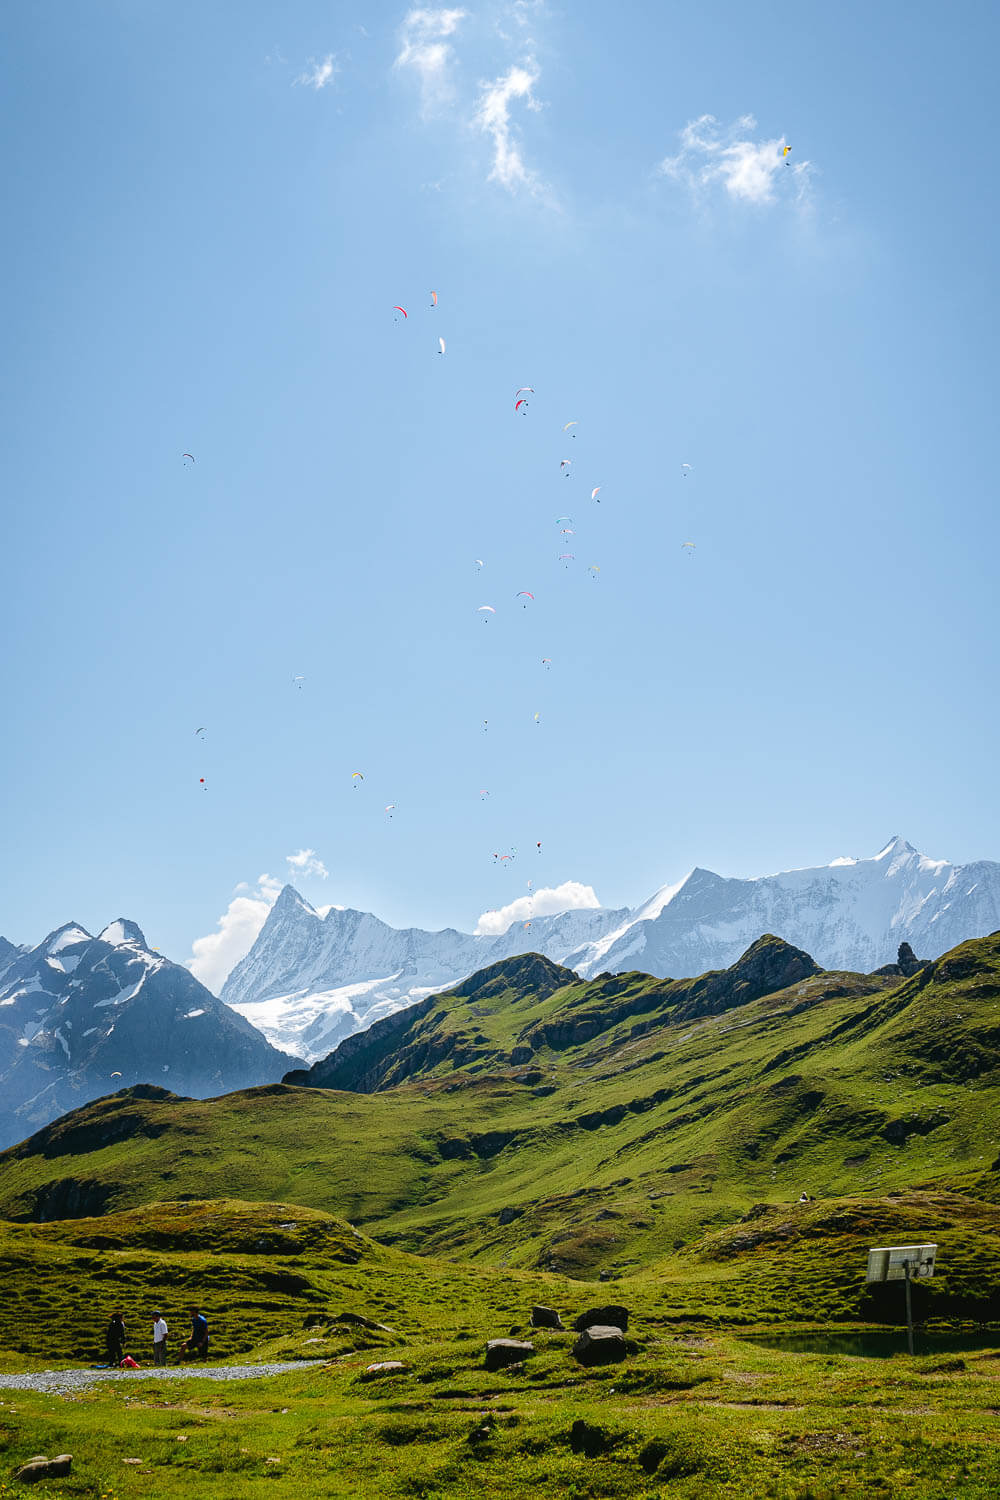 Paragliders over the Bachalpsee